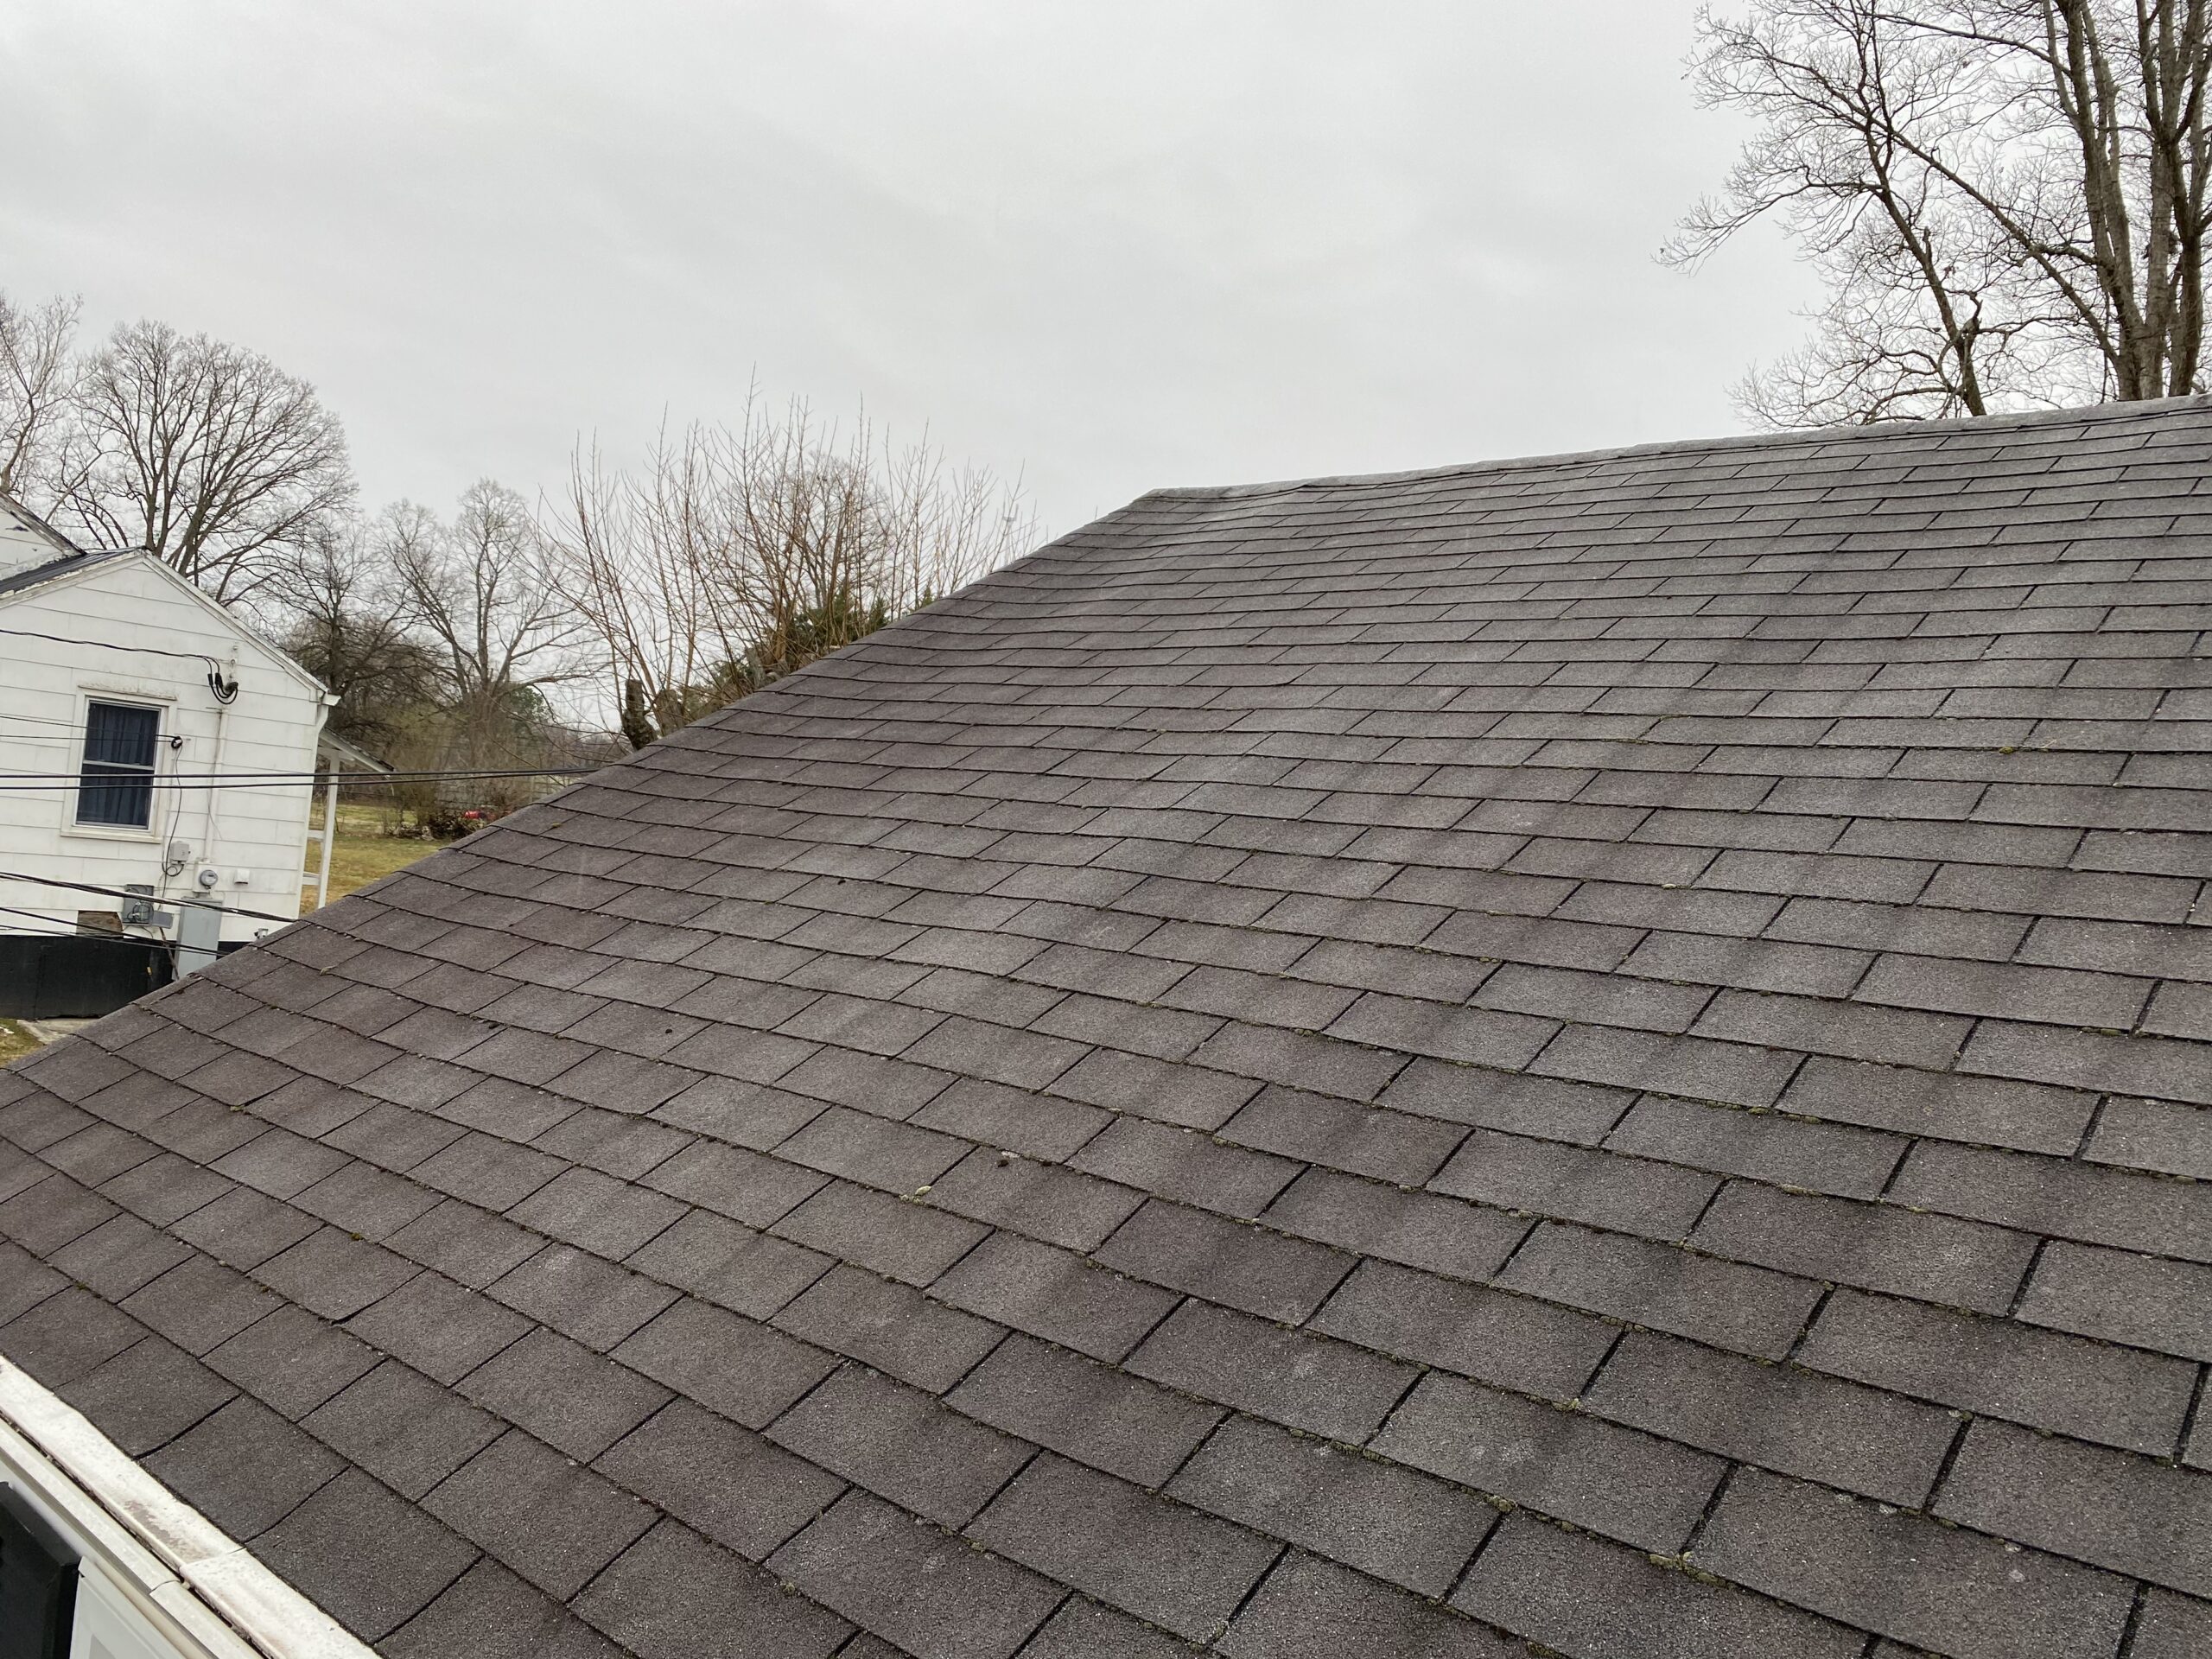 This is a picture of an old gray three tab roof